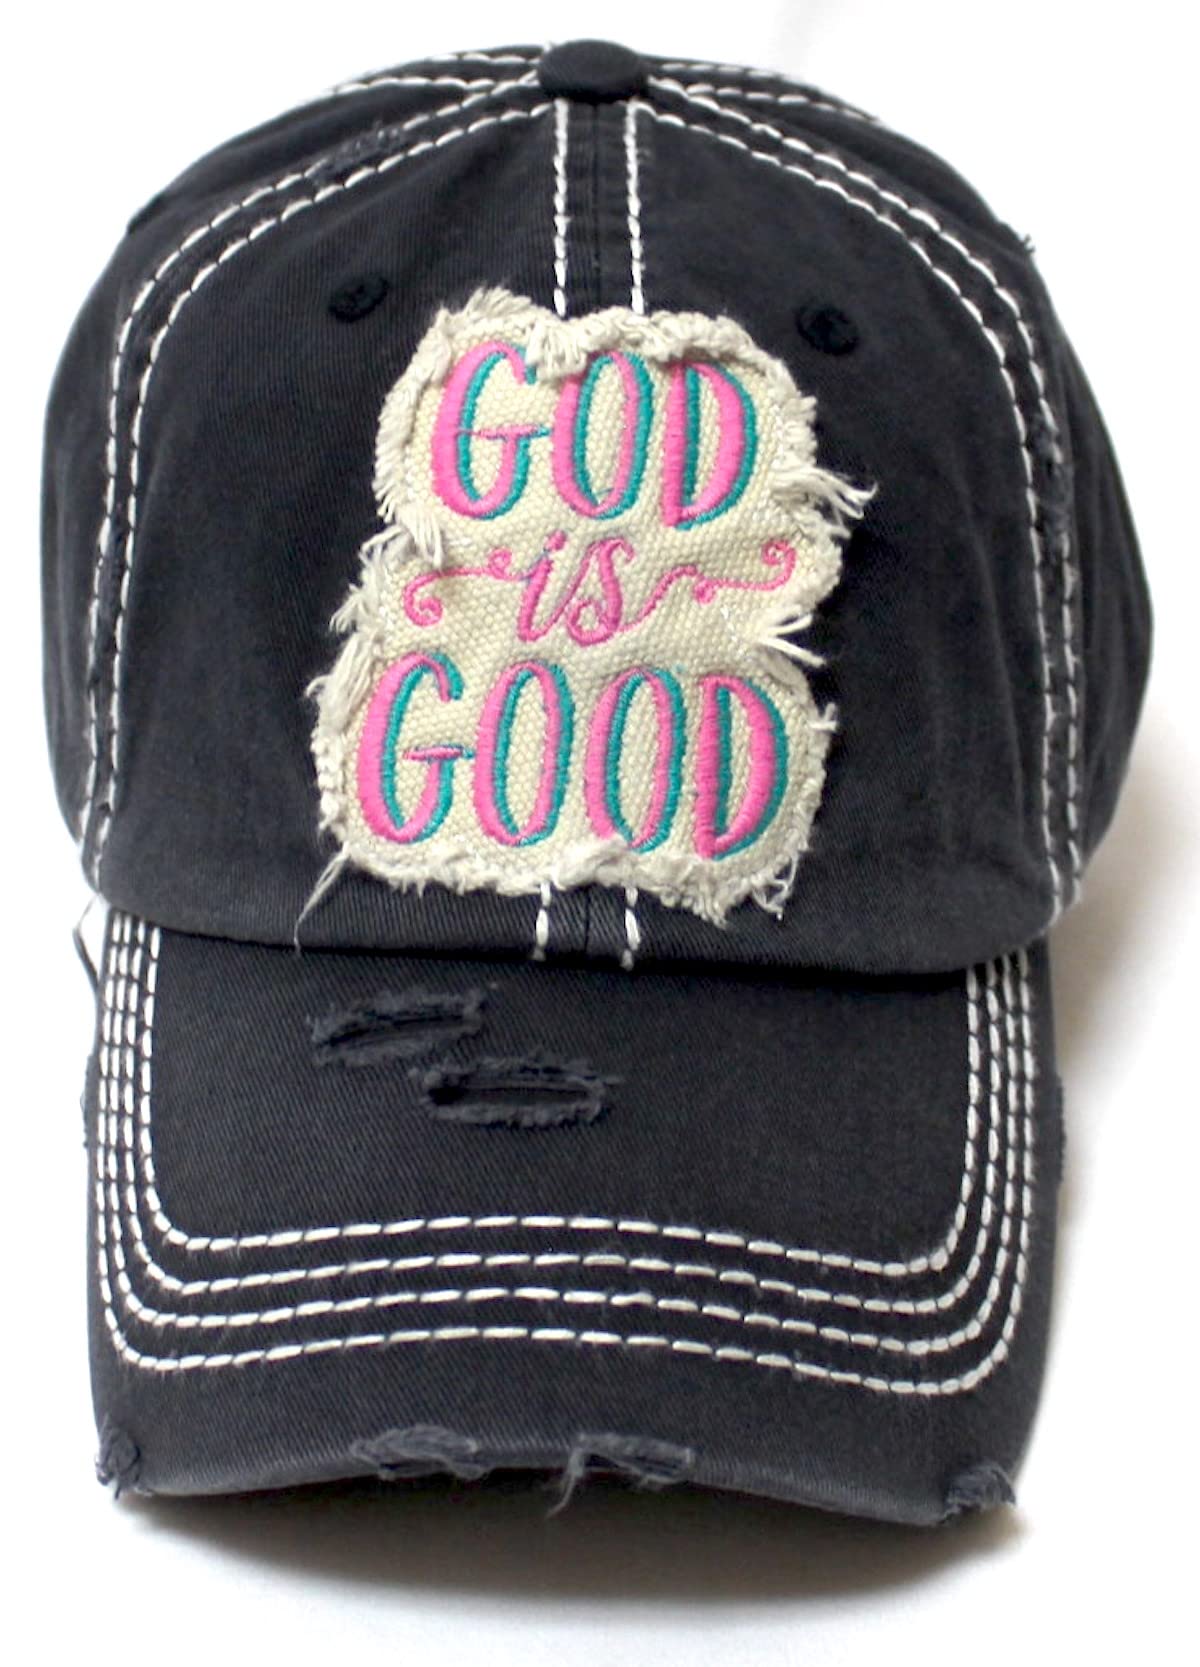 CAPS 'N VINTAGE Women's GOD is Good Patch Embroidery Monogram Hat